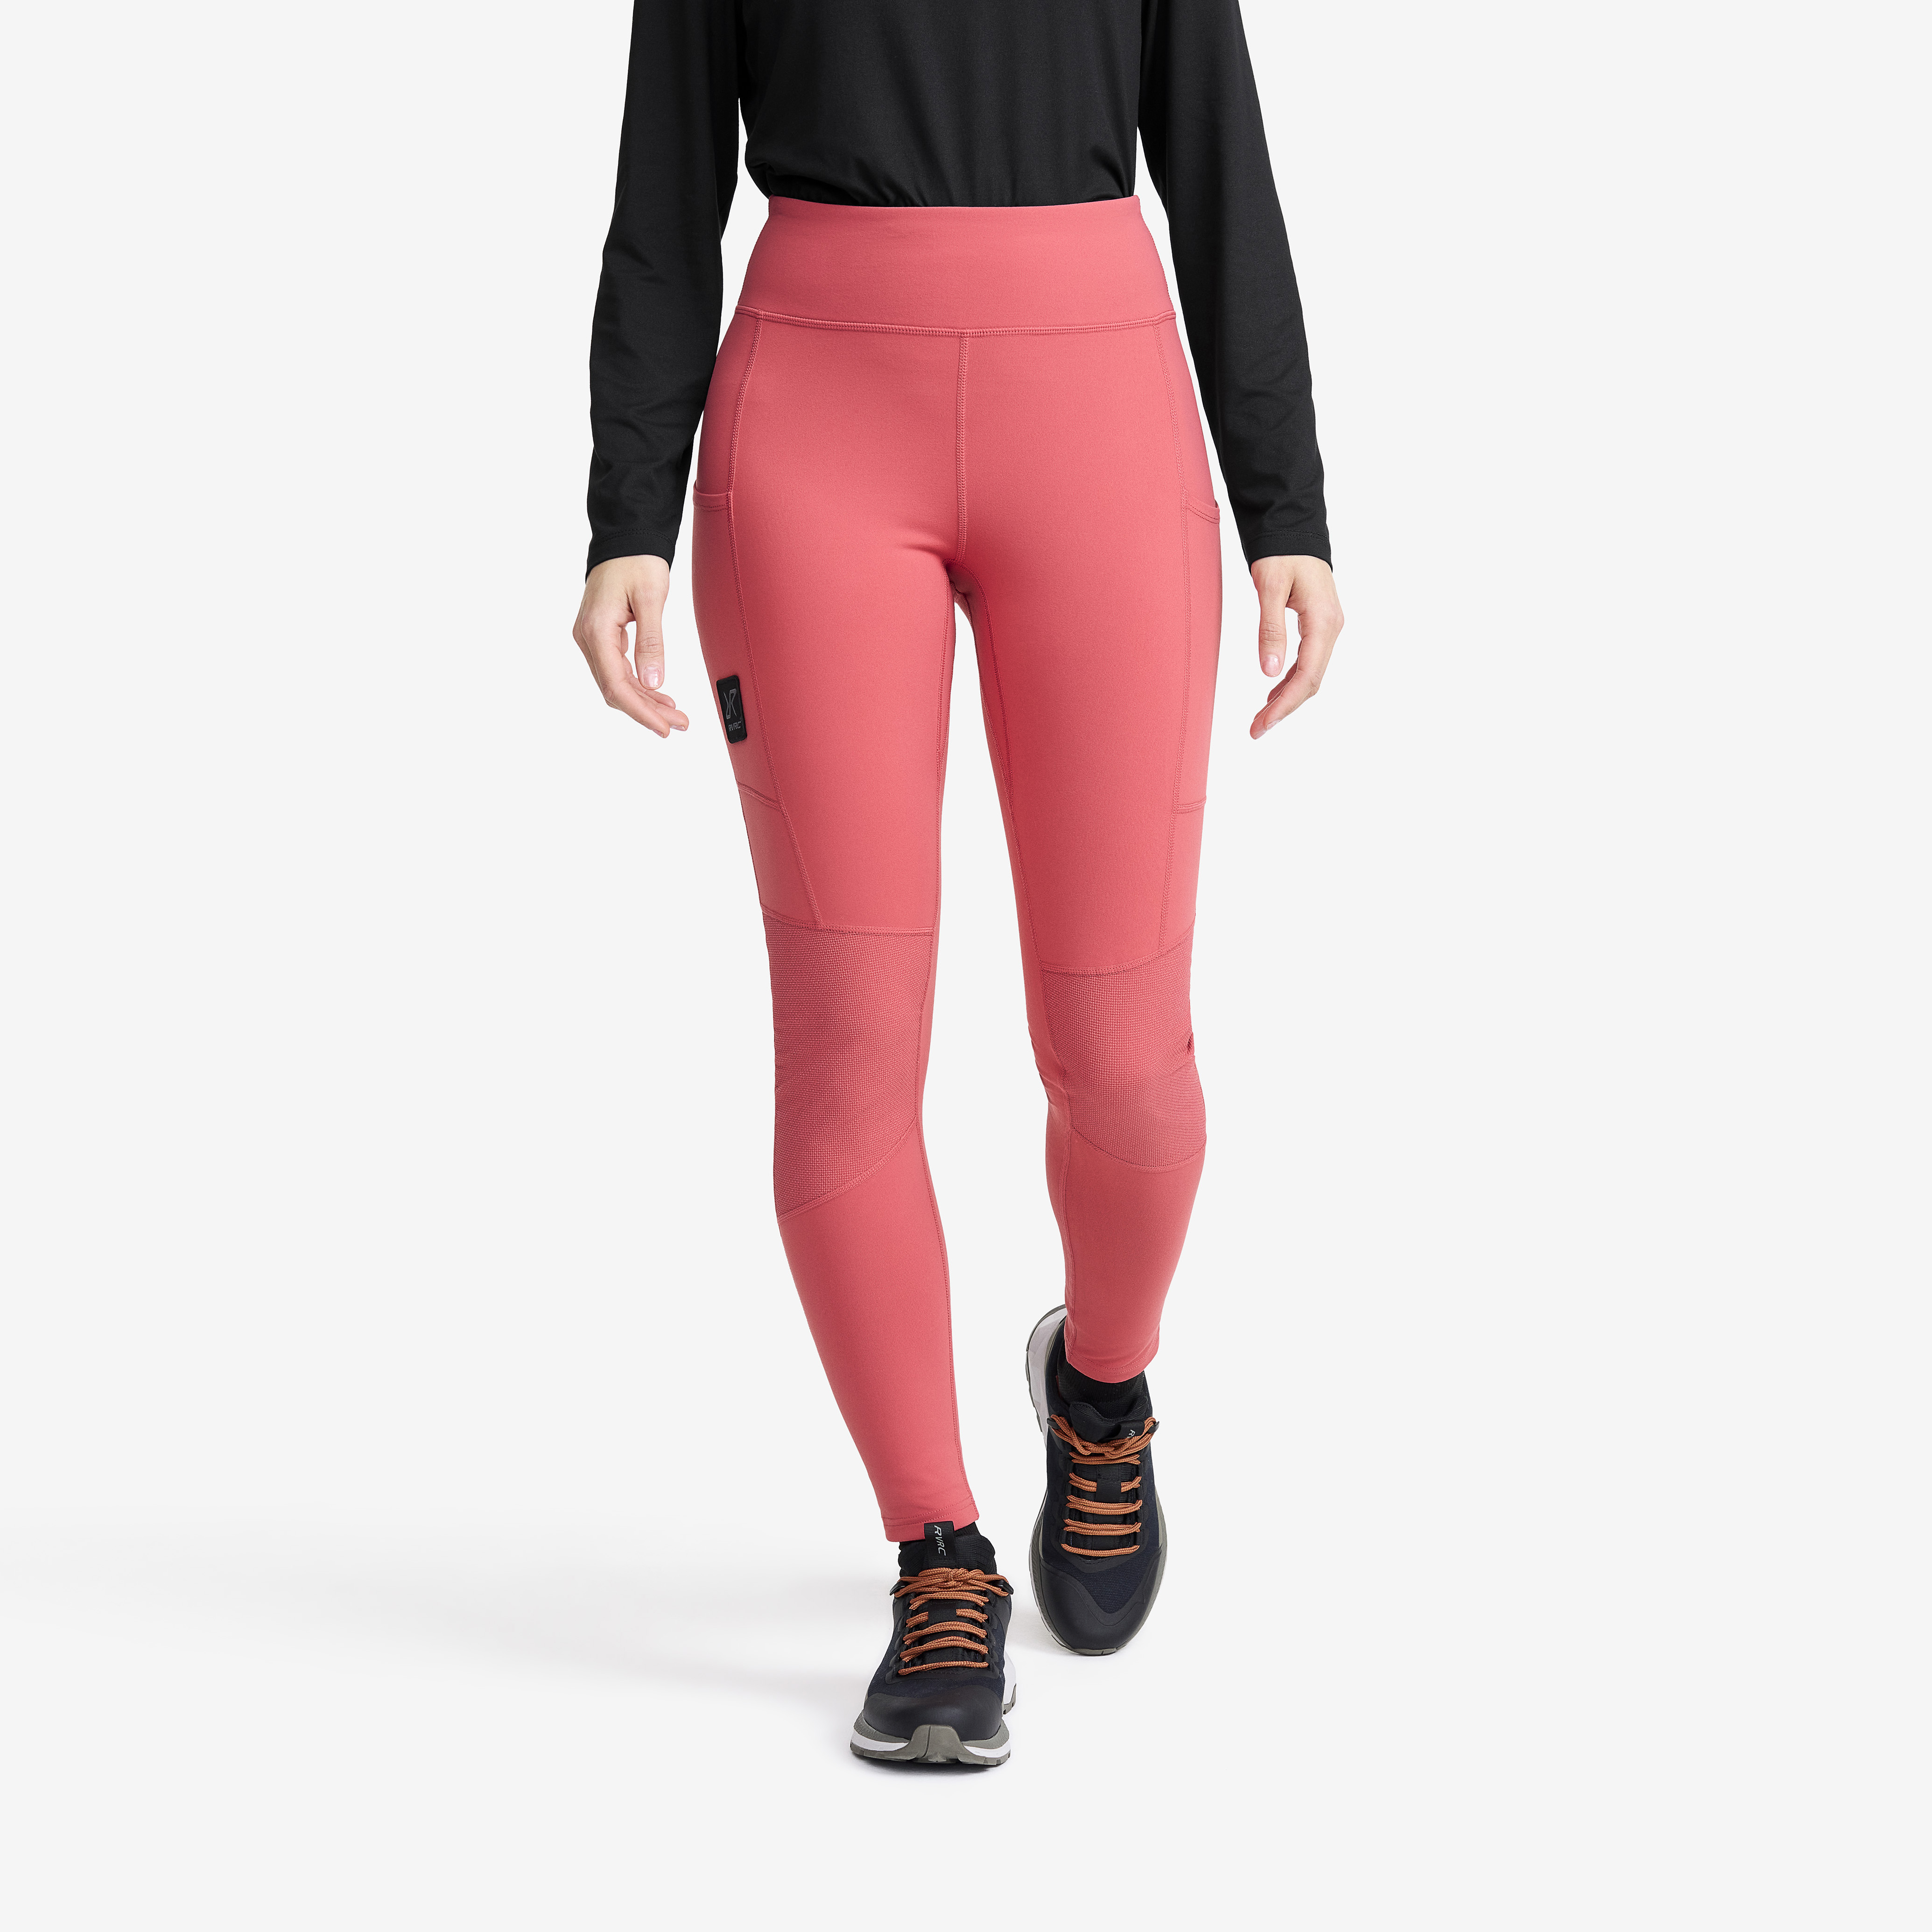 Summit Core Tights – Dam – Holly Berry Storlek:XL – Outdoor Tights